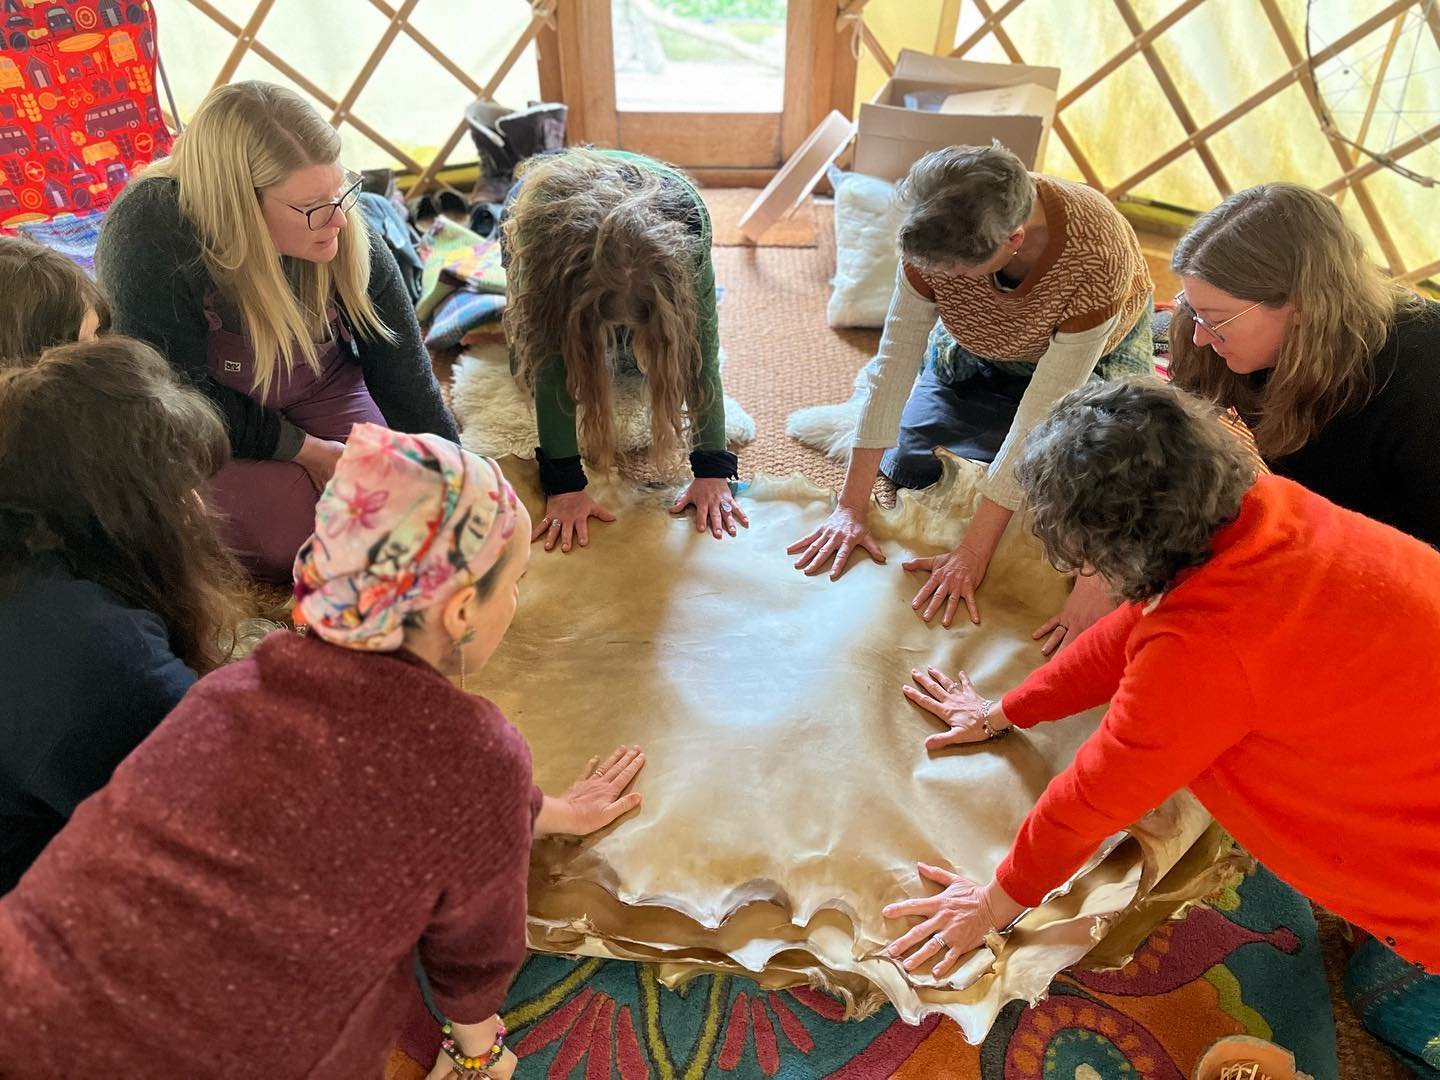 Day 1 of Sacred Drum Making weekend - Honouring the Deer.

Such an honour to meet and work with the spirits of the deer and trees we have been connecting with today.

Some powerful beings there!

I can&rsquo;t wait to see the magic of transformation 